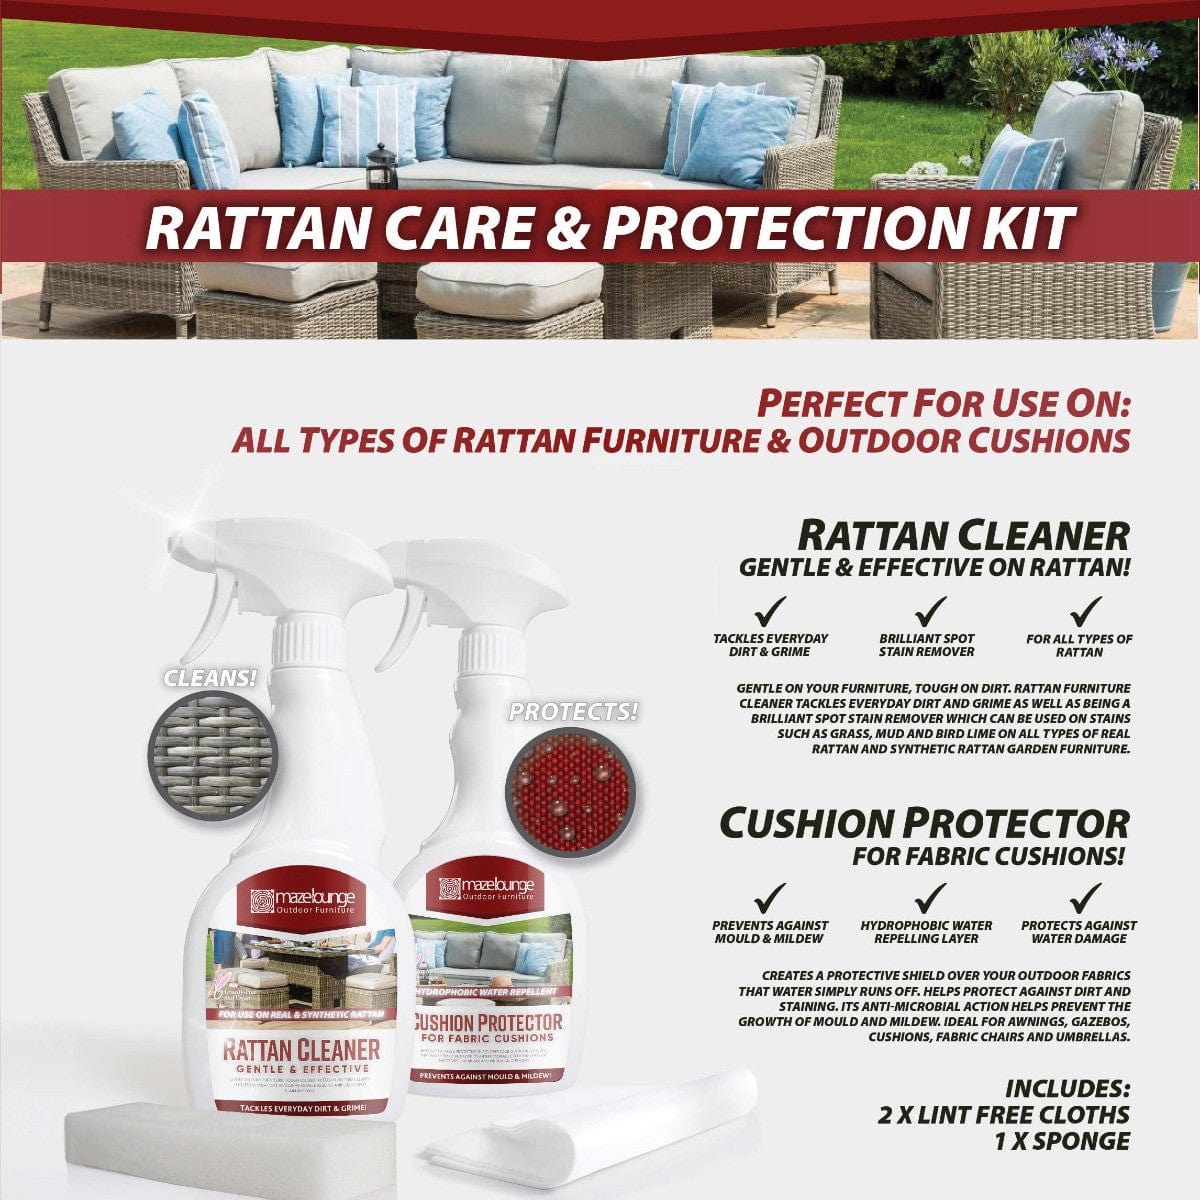 Maze Outdoors Cleaning Kit for Rattan and Cushion Protector House of Isabella UK